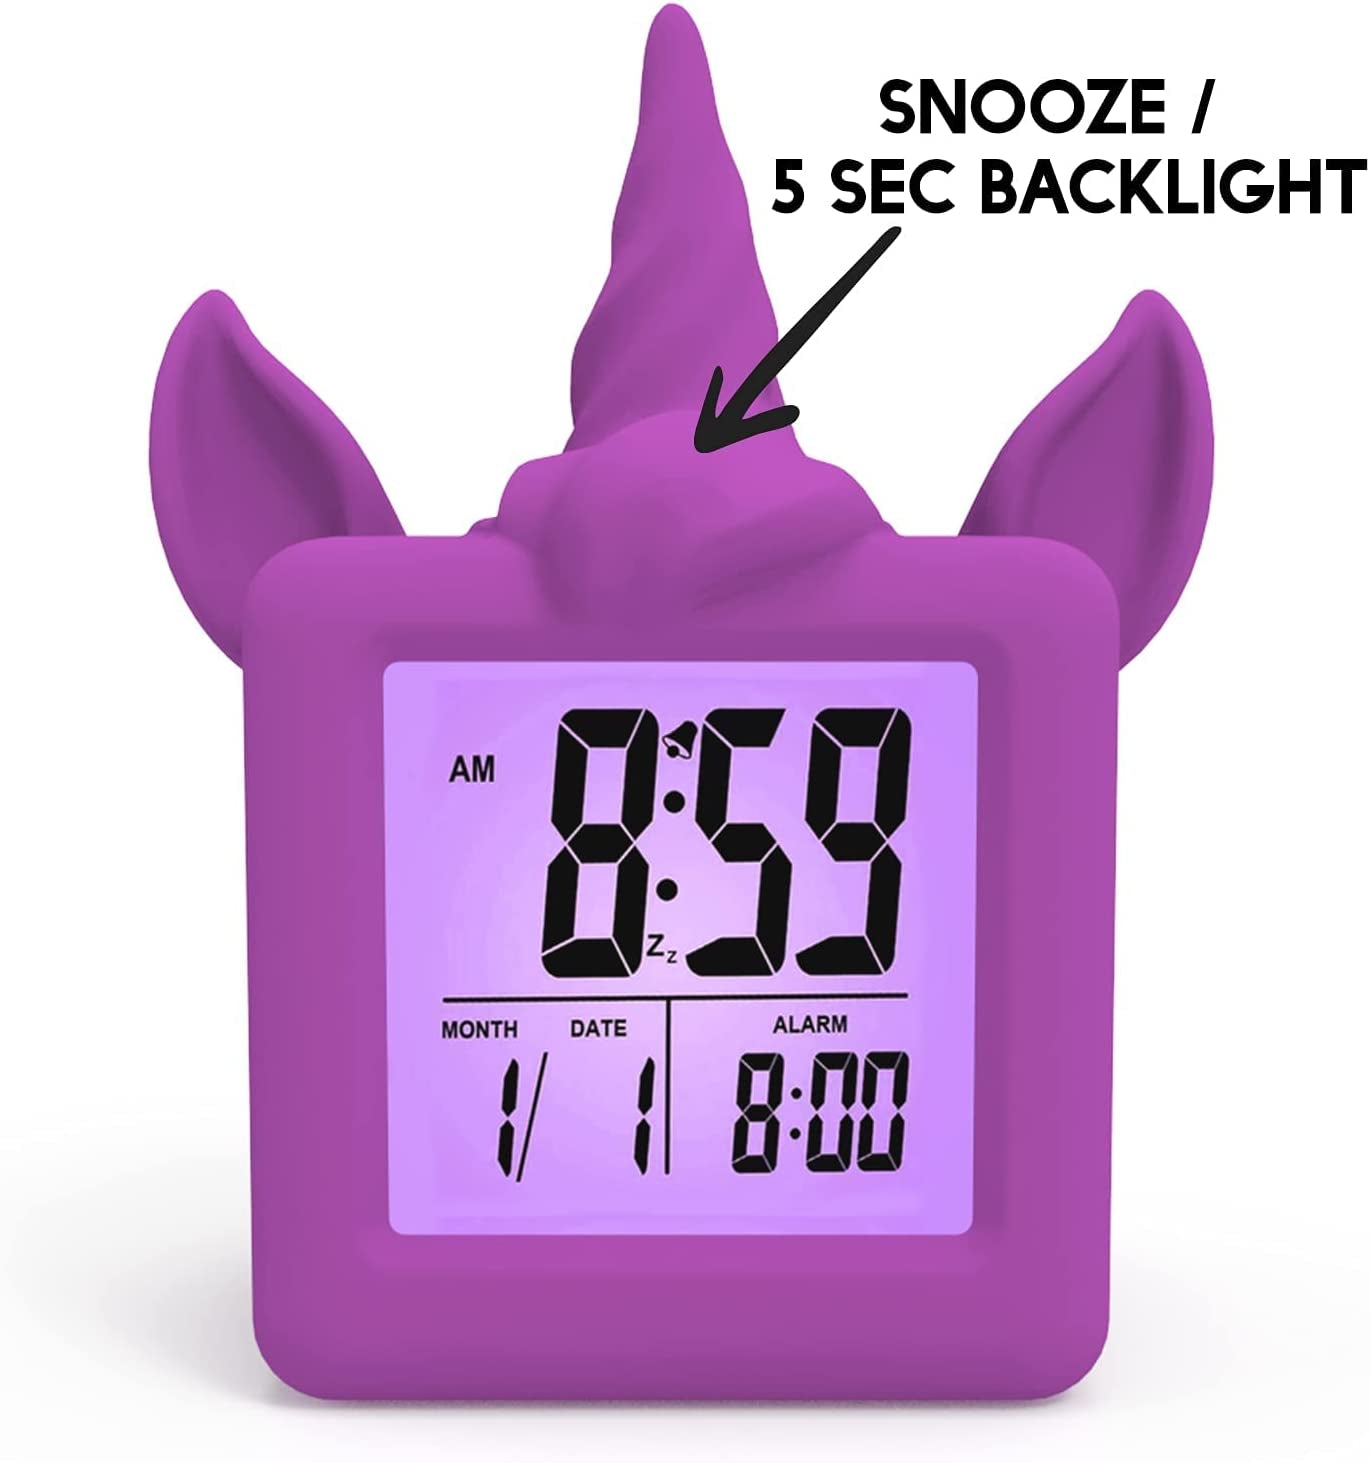 Something Unicorn - Unicorn Digital Alarm Clock with Snooze Button and Purple LCD Back-Lighting. Easy to Set Battery Powered Digital Clock in Silicone Sleeve with Time, Date and Alarm Display.(Purple)